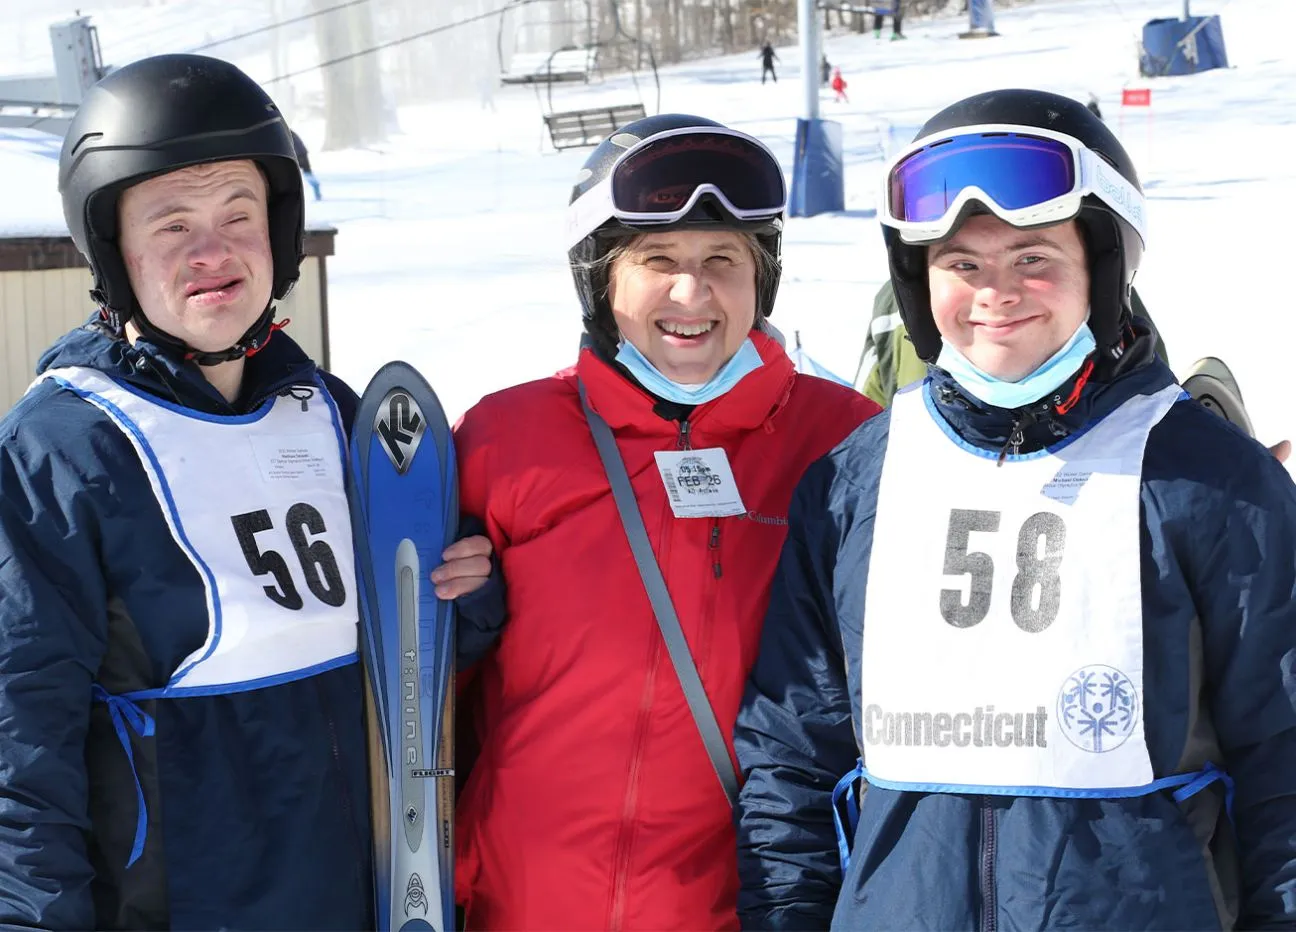 Two athletes standing with a partner outside in the snow wearing skiing attire.